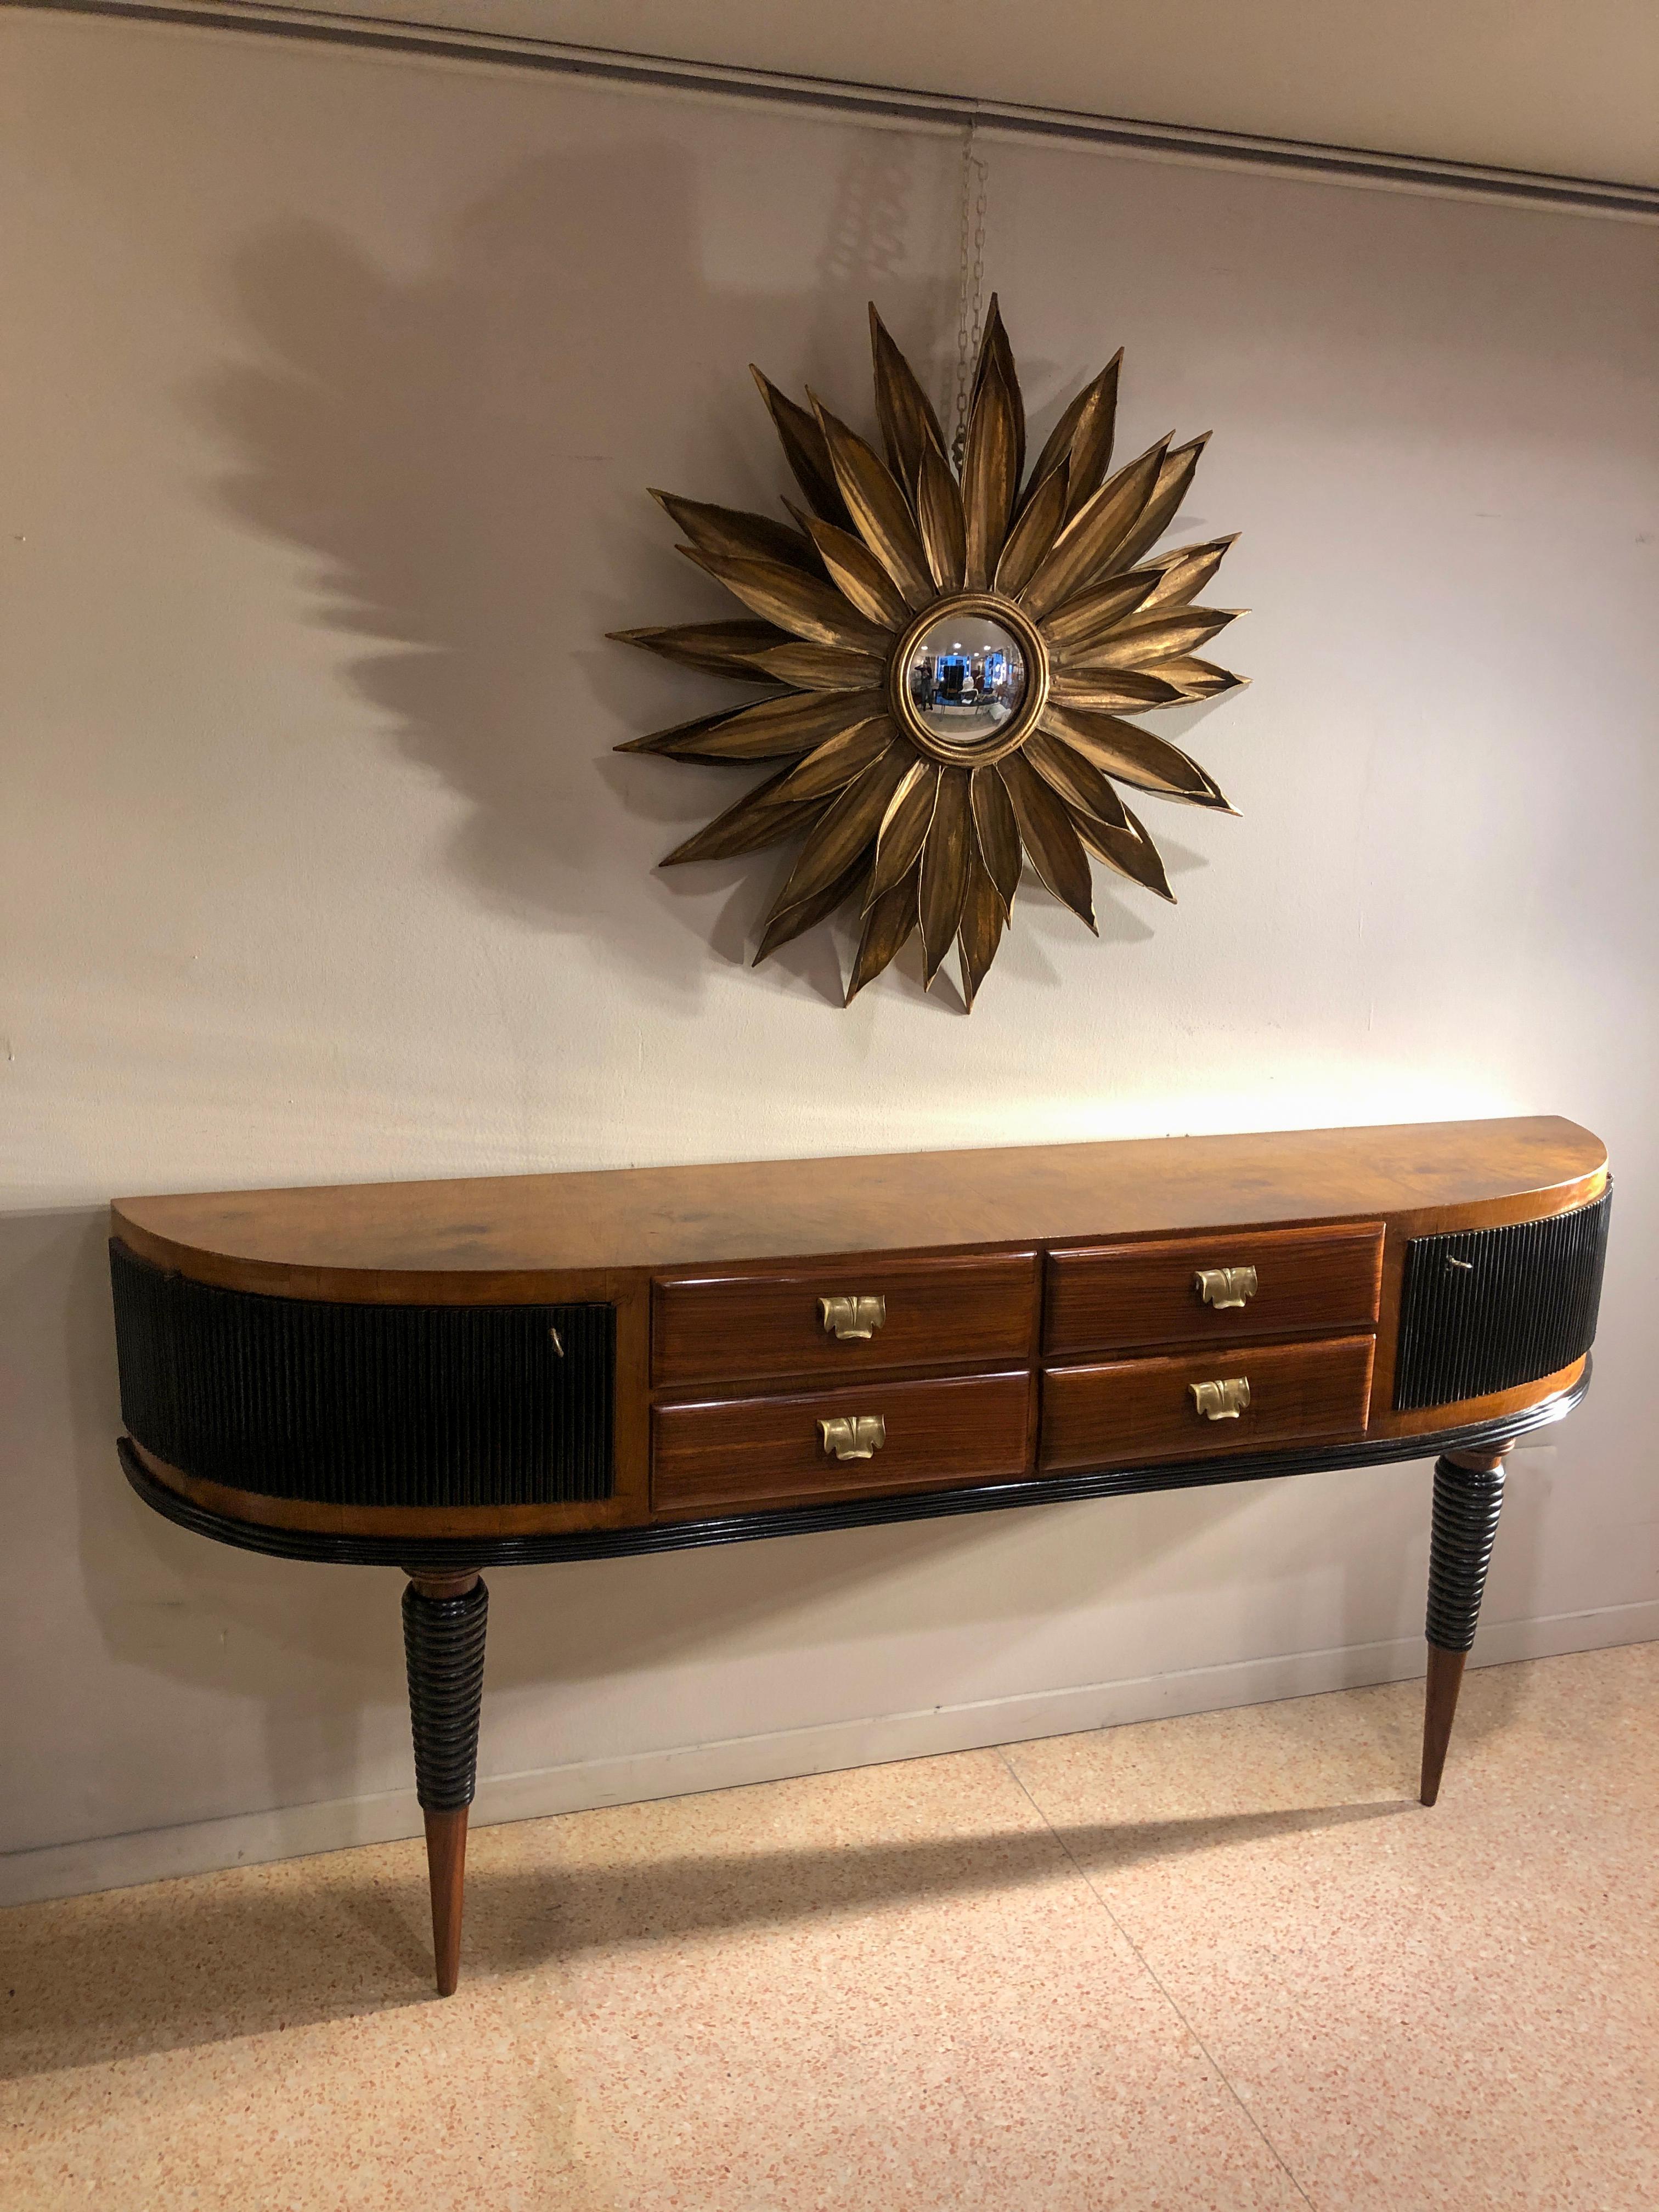 Art Deco rosewood table console credenza with rounded edges doors and four drawers with brass leaves shapes handles. There are some black lacquered ebonized parts such us the legs and the curved doors. The console measures D 38 cm, L 200 cm, H 90